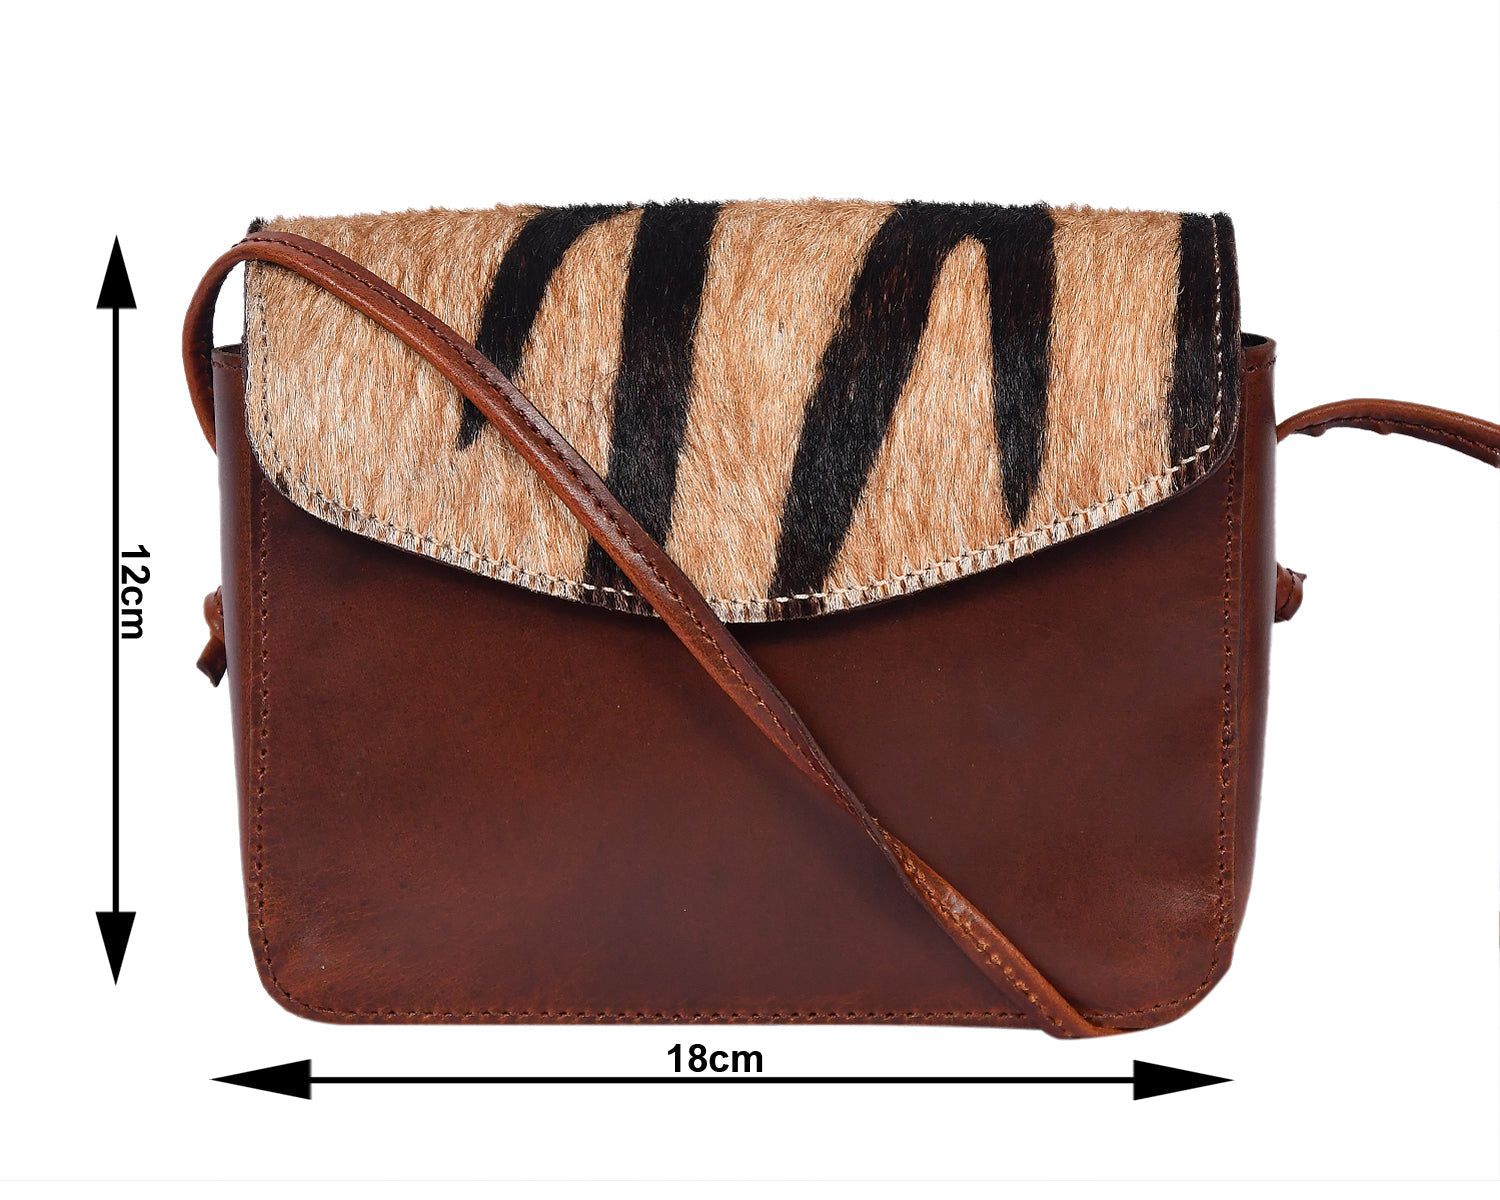 Elevate - Brown Leather Sling Bag with Hair-On Leather - CELTICINDIA